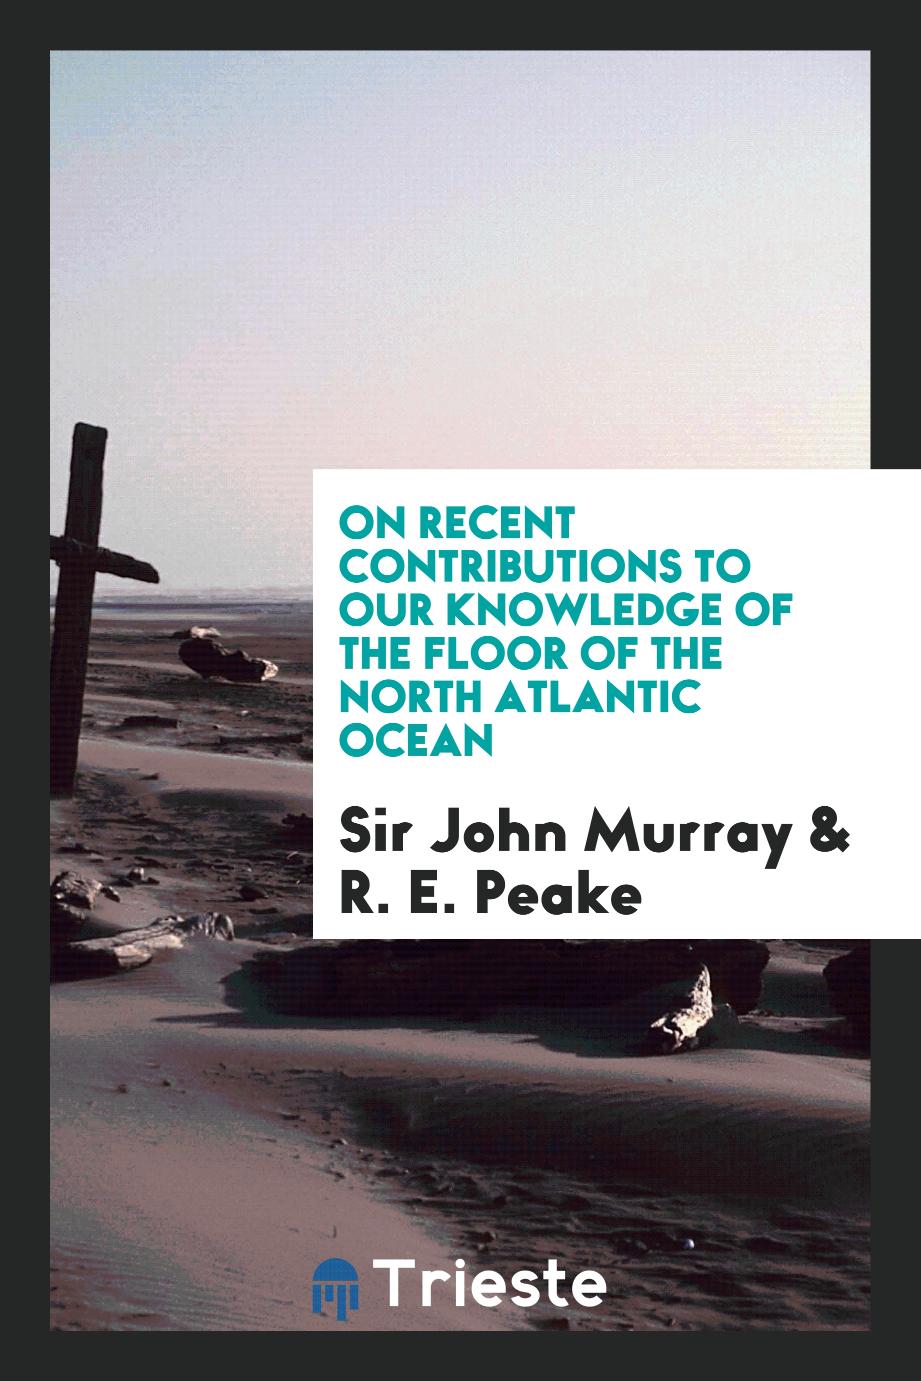 On recent contributions to our knowledge of the floor of the north Atlantic ocean